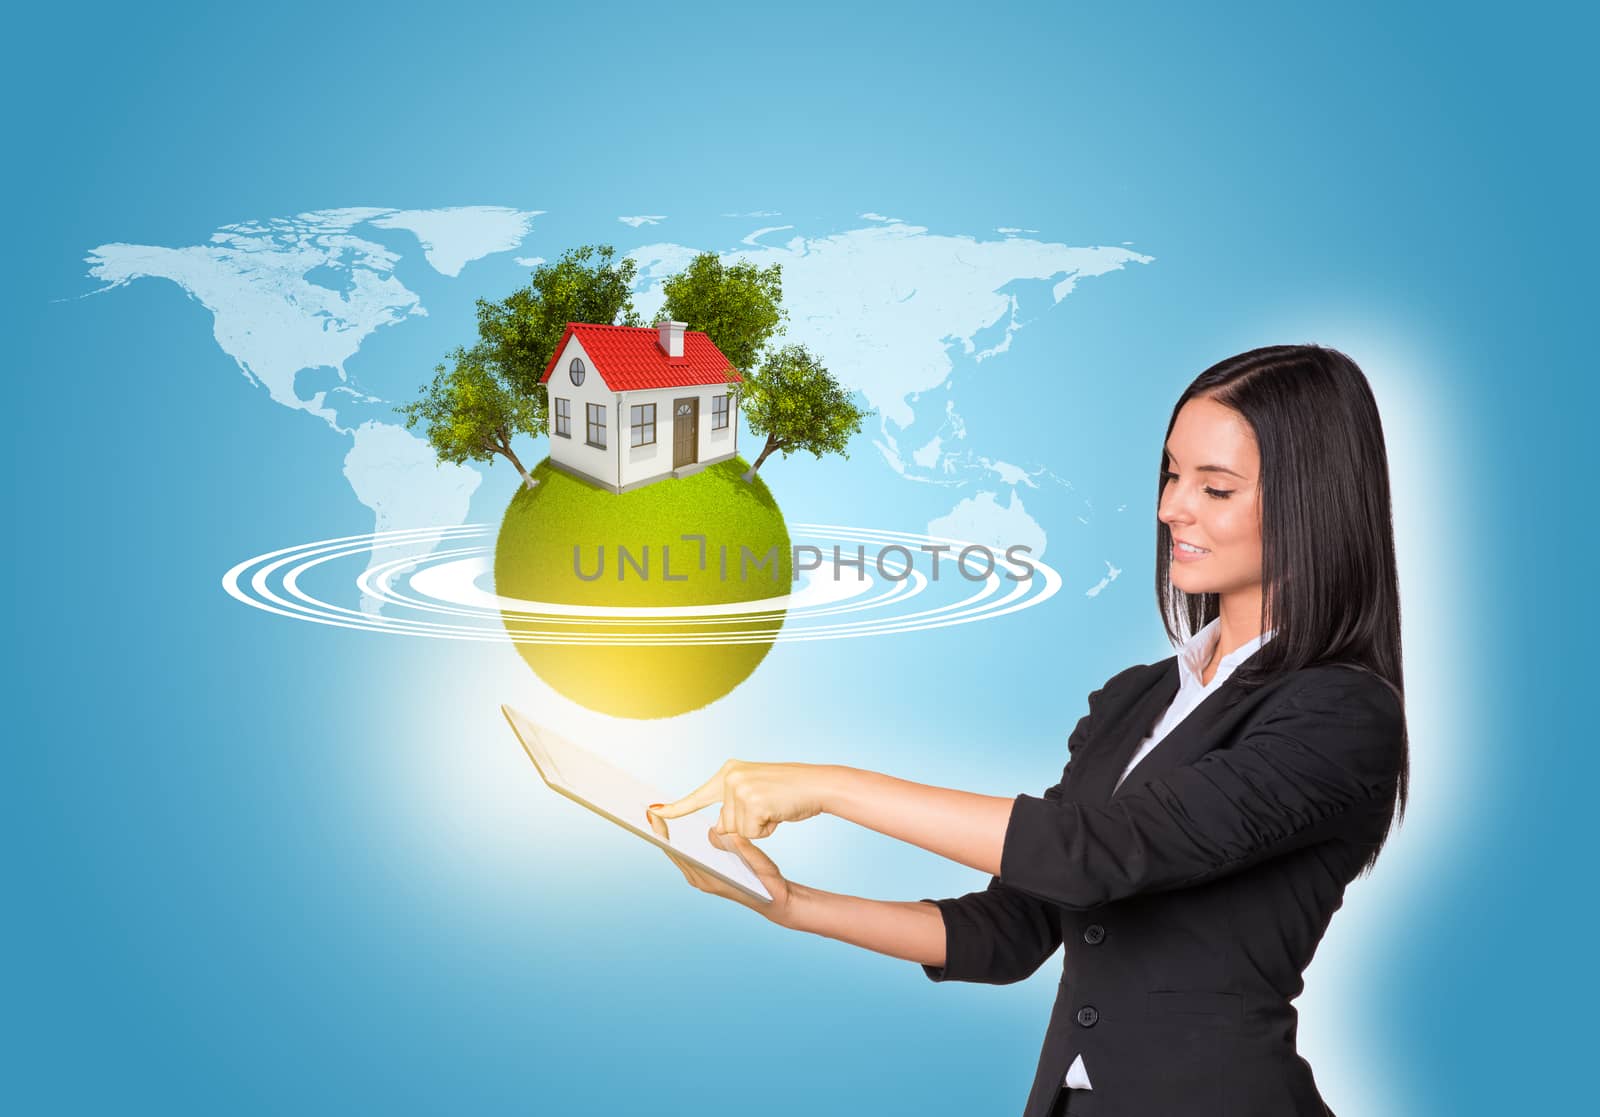 Beautiful businesswomen in suit using digital tablet. Earth with house and trees. World map as backdrop